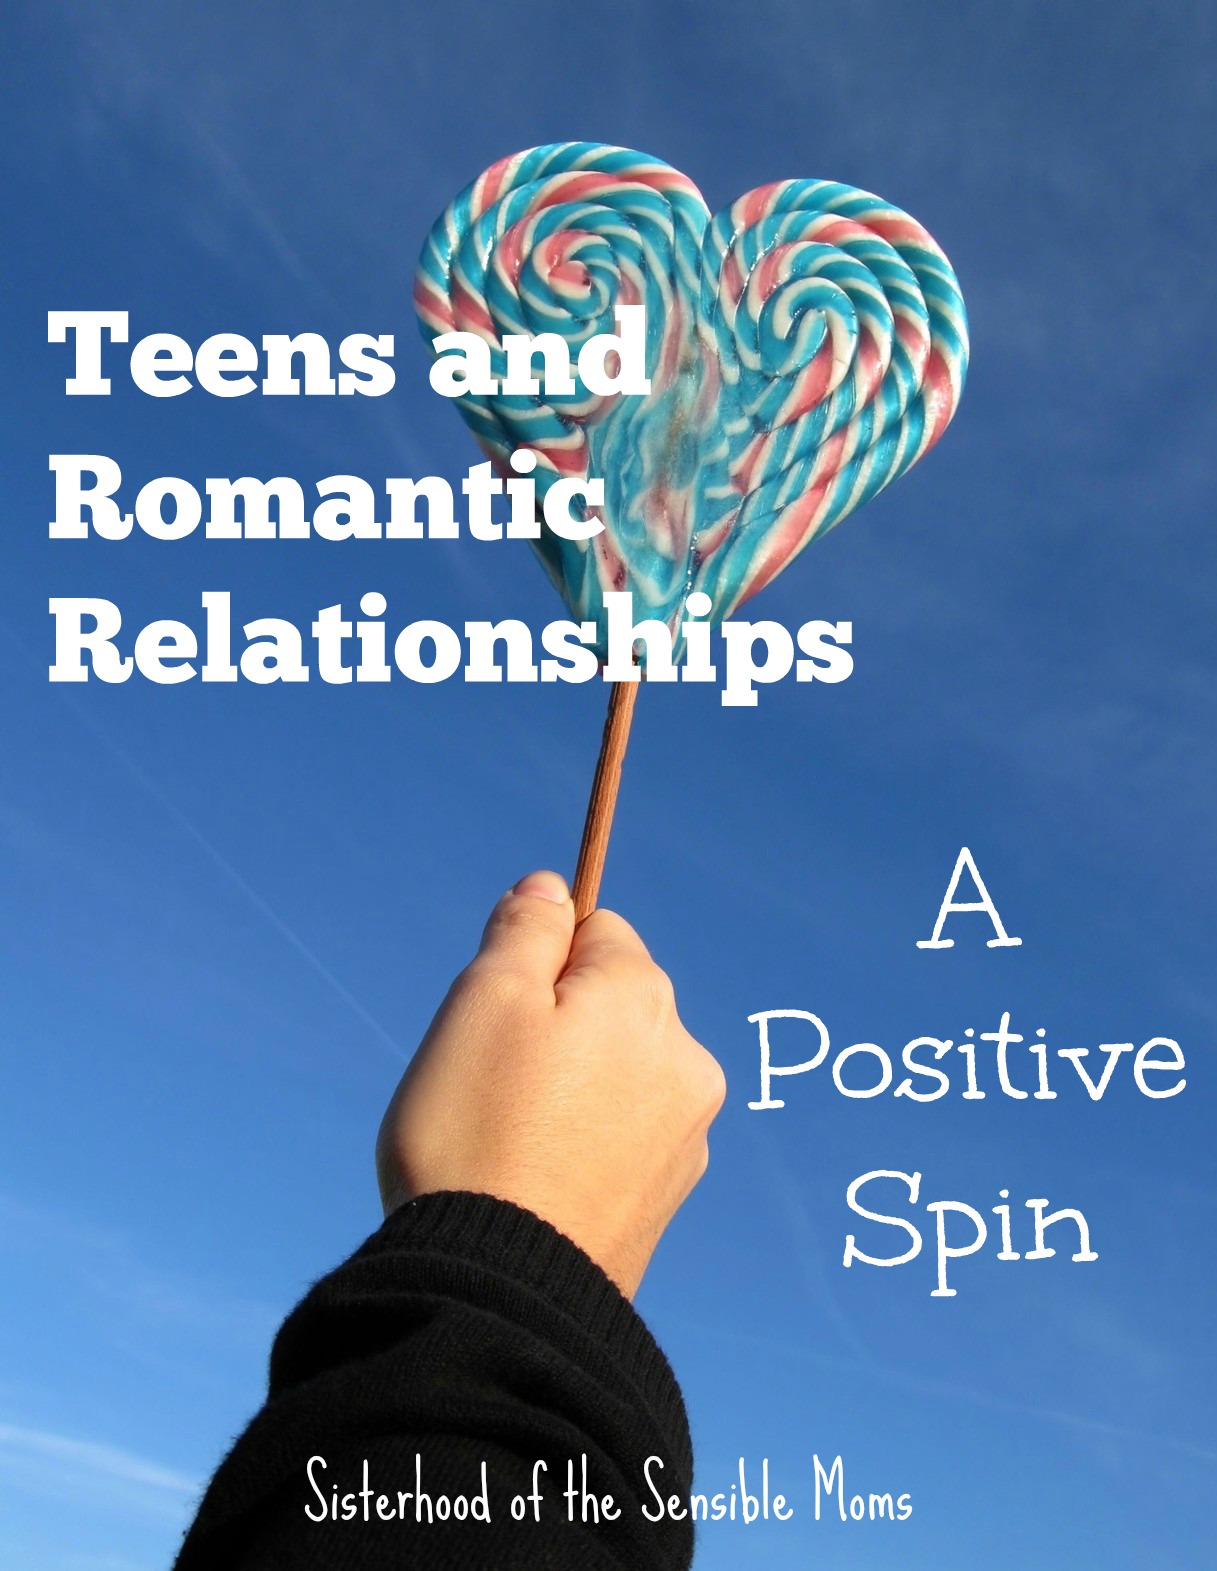 Teens and Romantic Relationships: A Positive Spin. Does the thought of your teen dating give you hives? We're highlighting the positive life lessons they can learn from it. | Parenting Advice | Sisterhood of the Sensible Moms